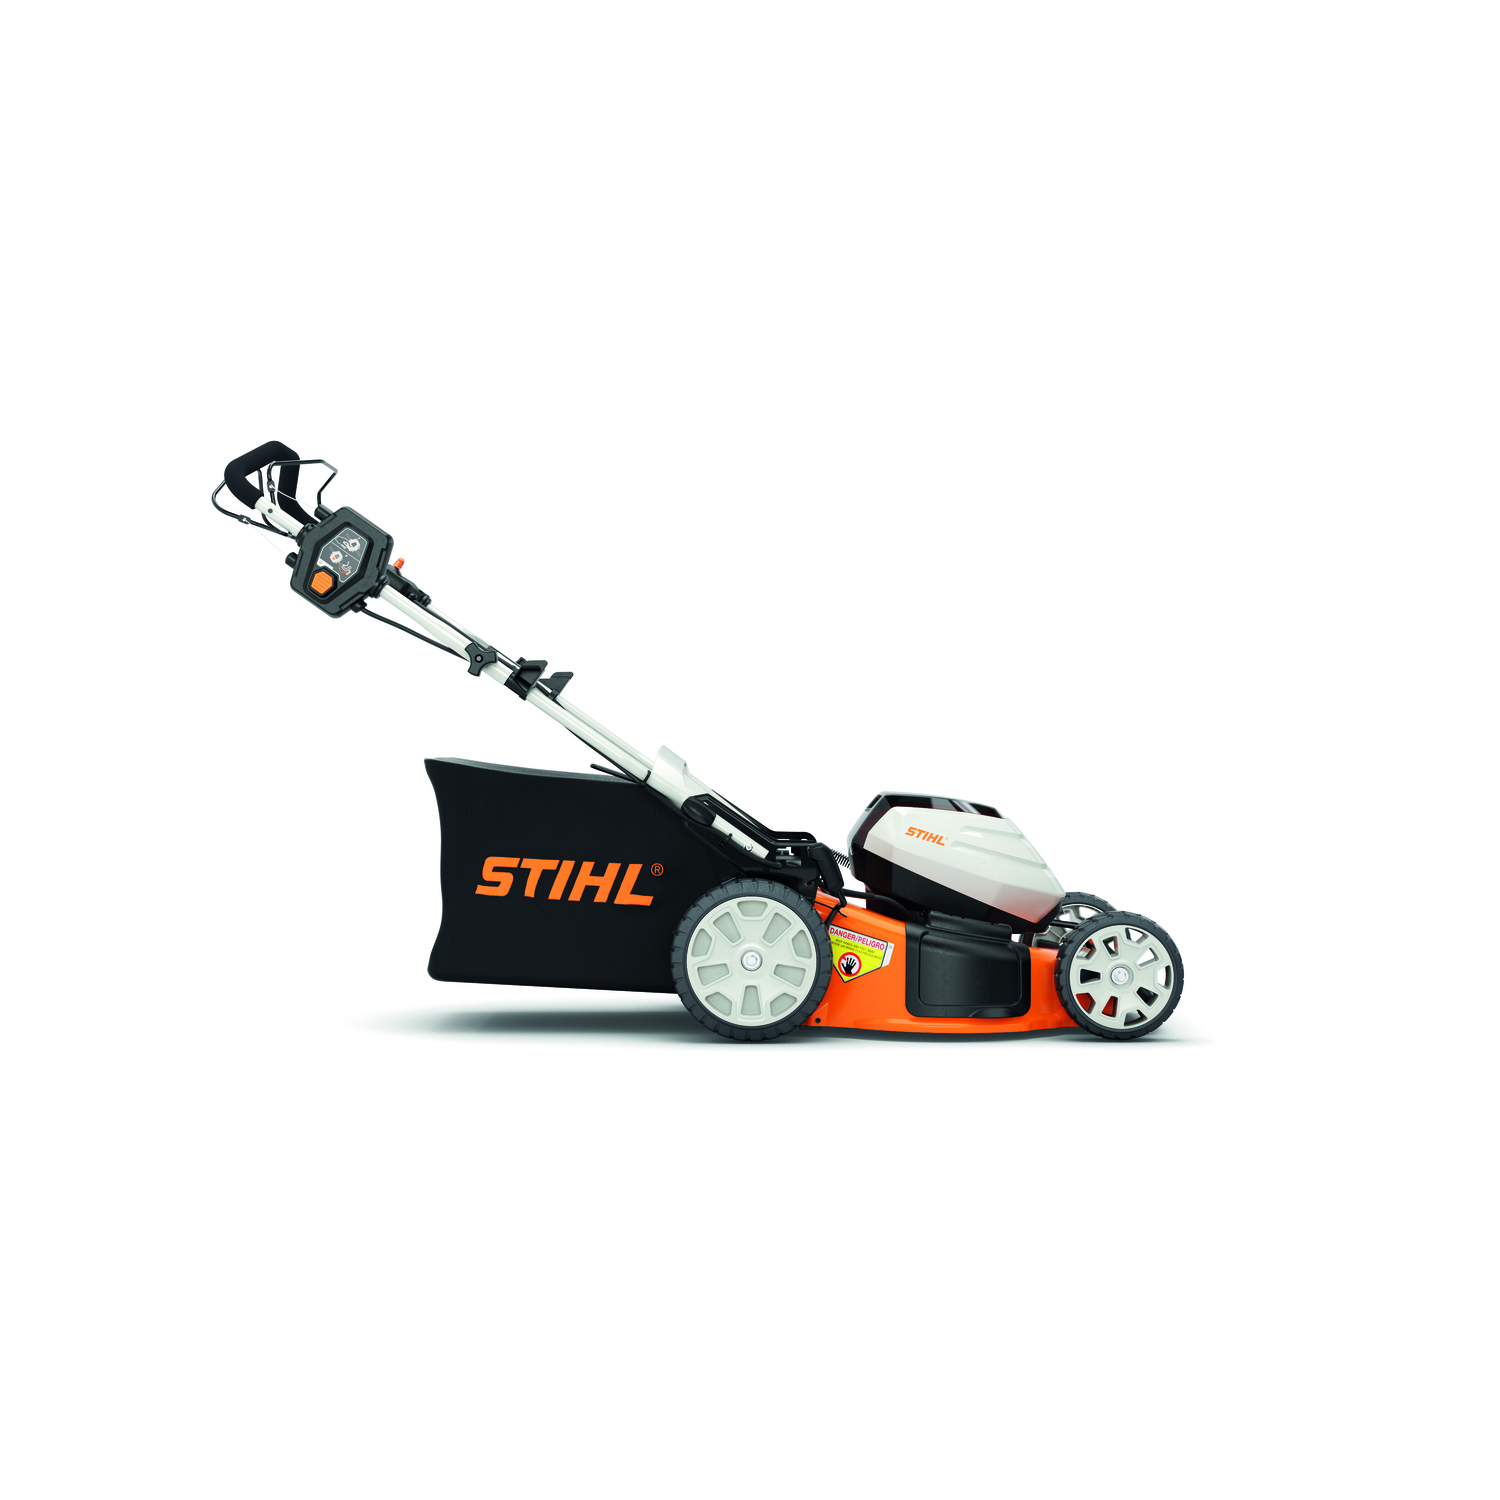 STIHL RMA 460 V 19 in. 36 V Battery Self-Propelled Lawn Mower Kit (Battery \u0026 Charger)